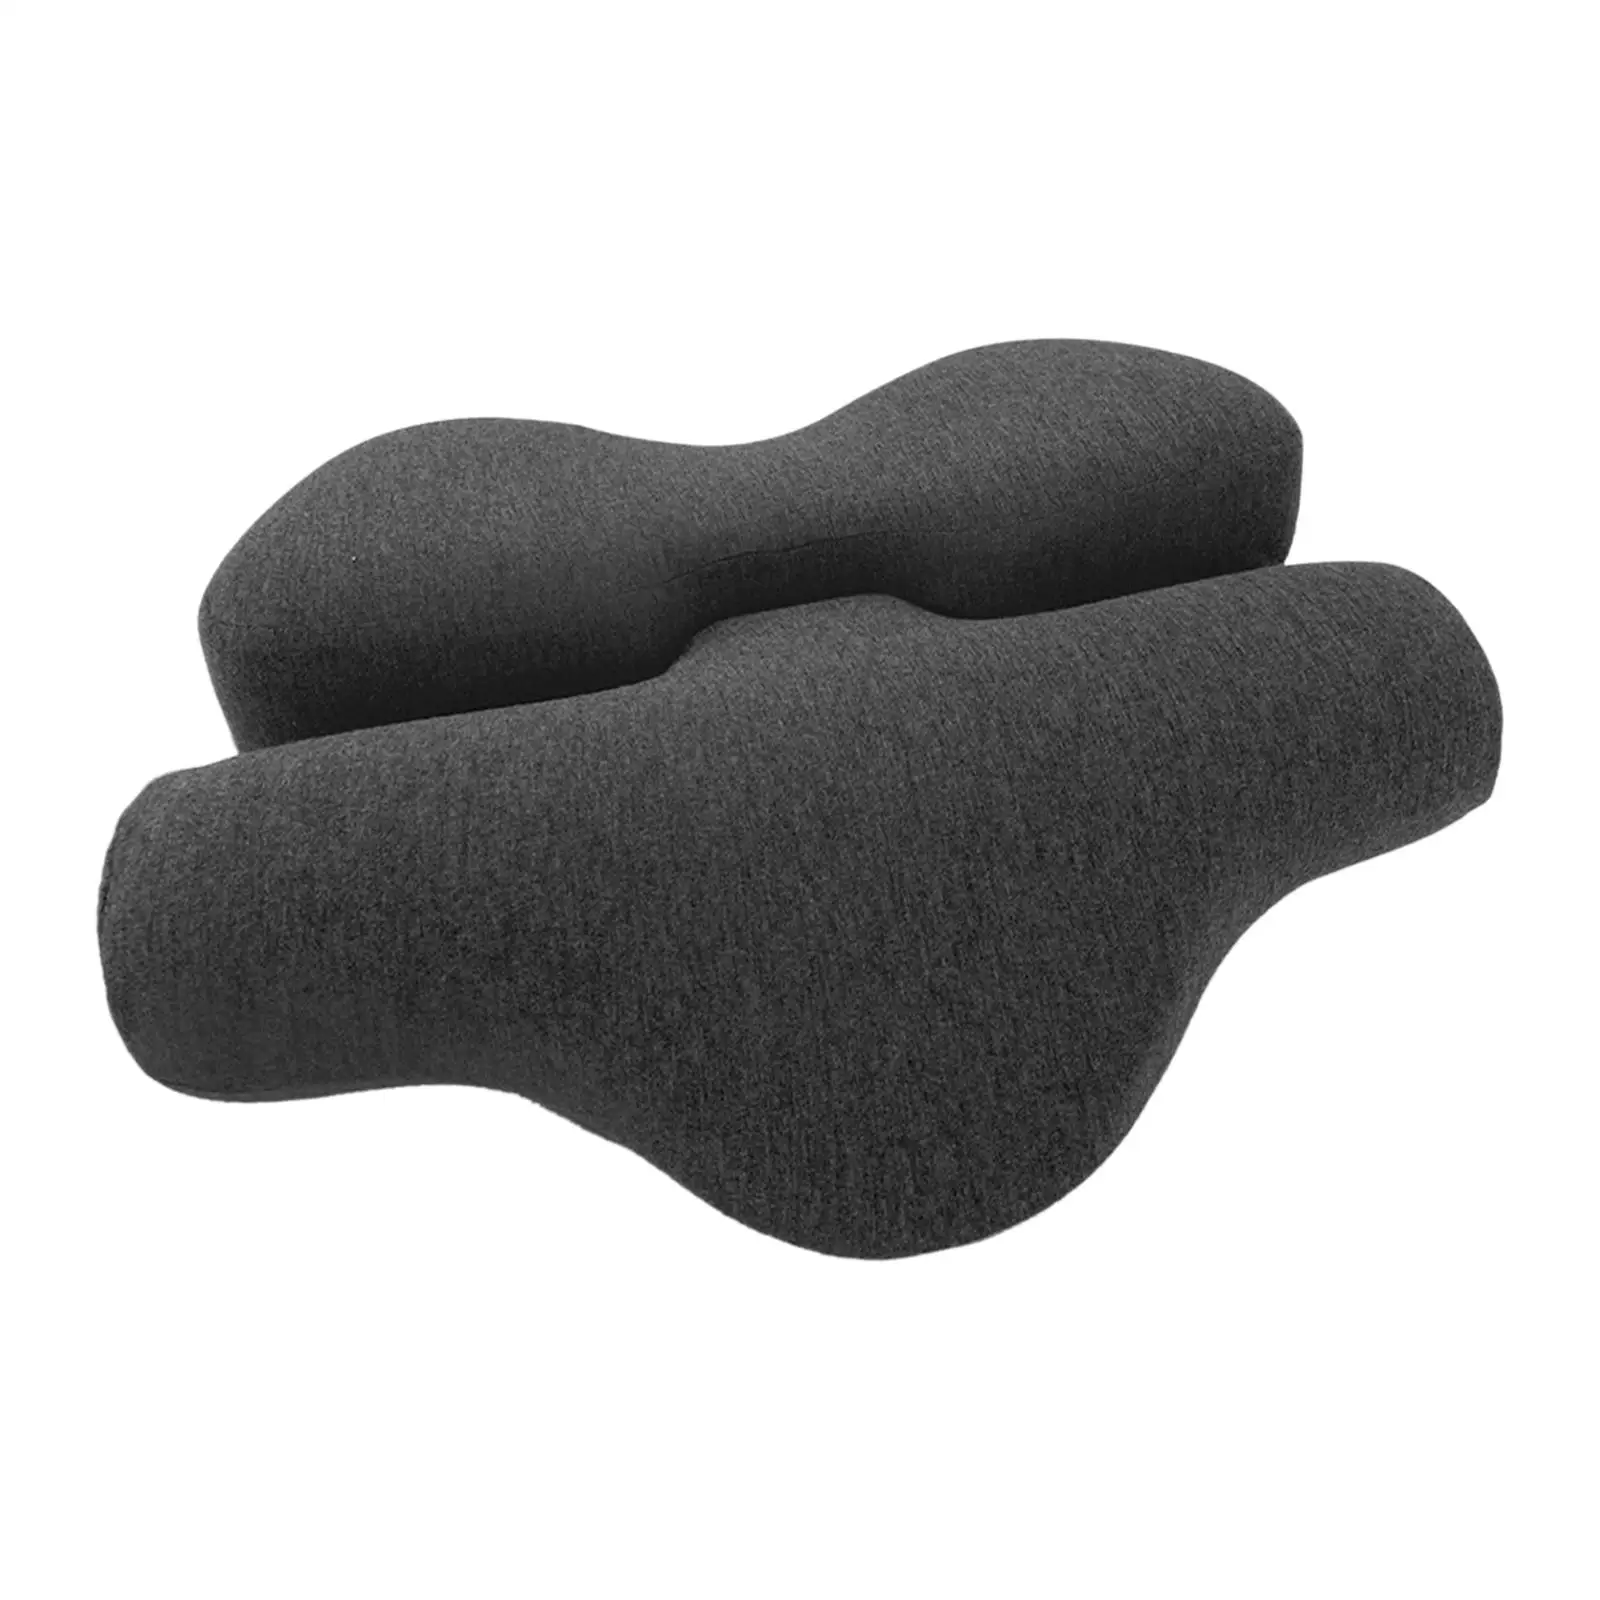 Cervical Pillow Memory Foam pillow Neck and Shoulder Relaxation Neck Pillow